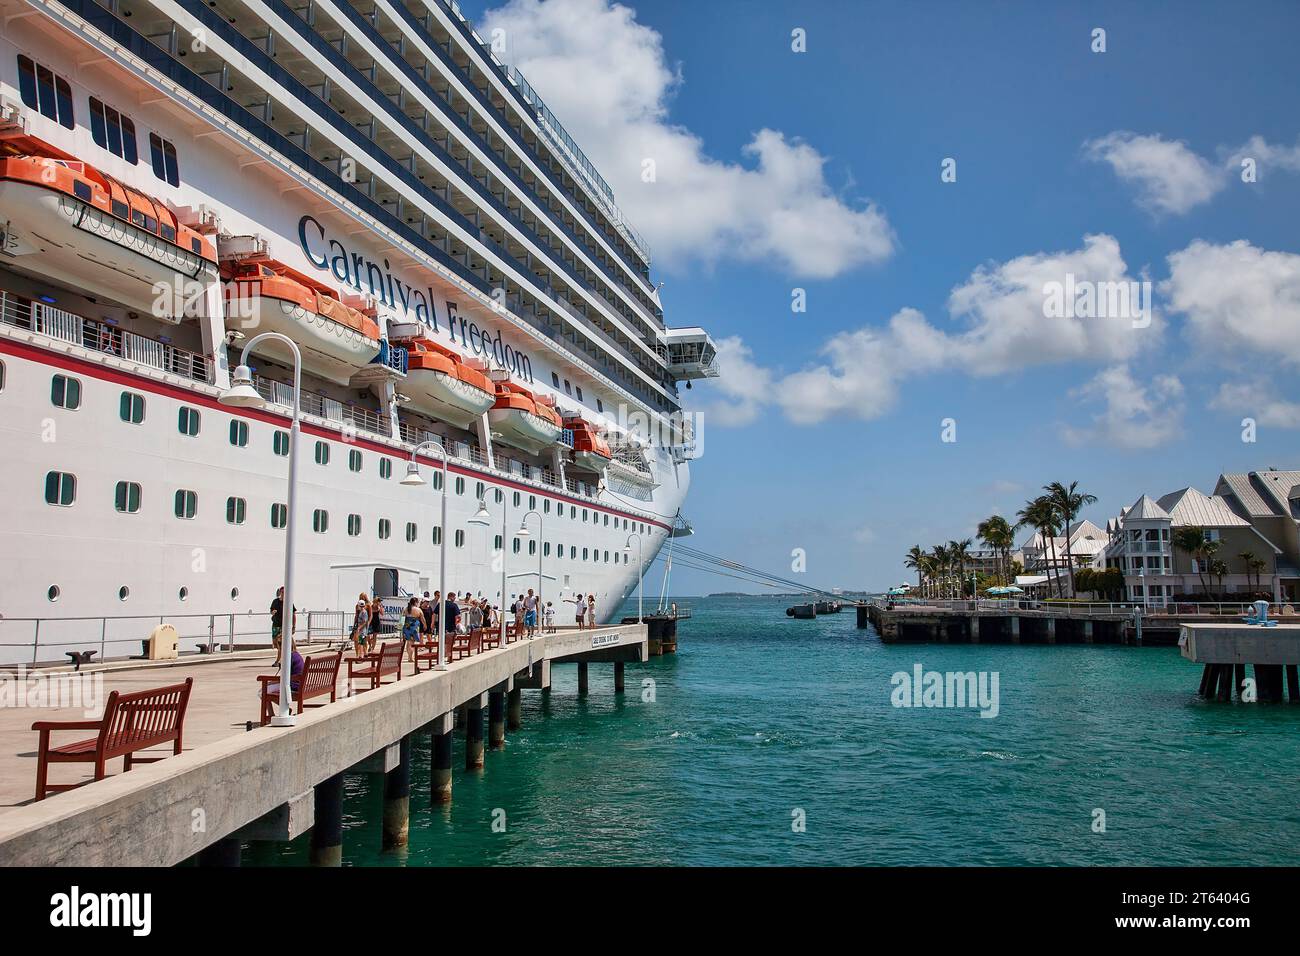 Key West, Florida - July 11, 2011:  The Carnival Freedom Cruise Ship anchored in port in Key West, Florida. Stock Photo